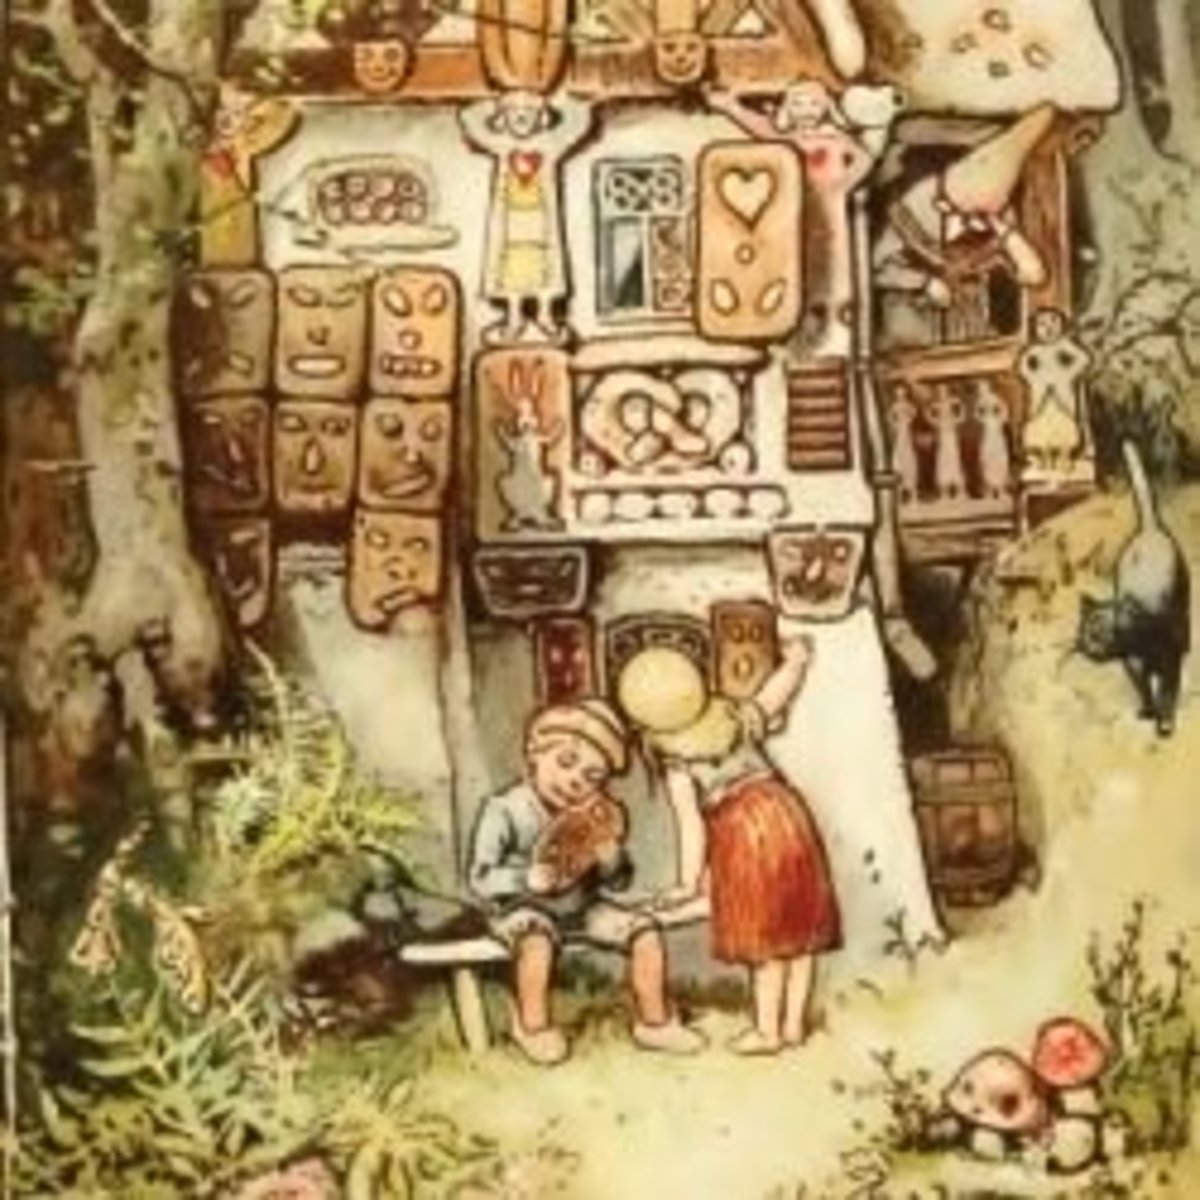 the theme of hansel and gretel